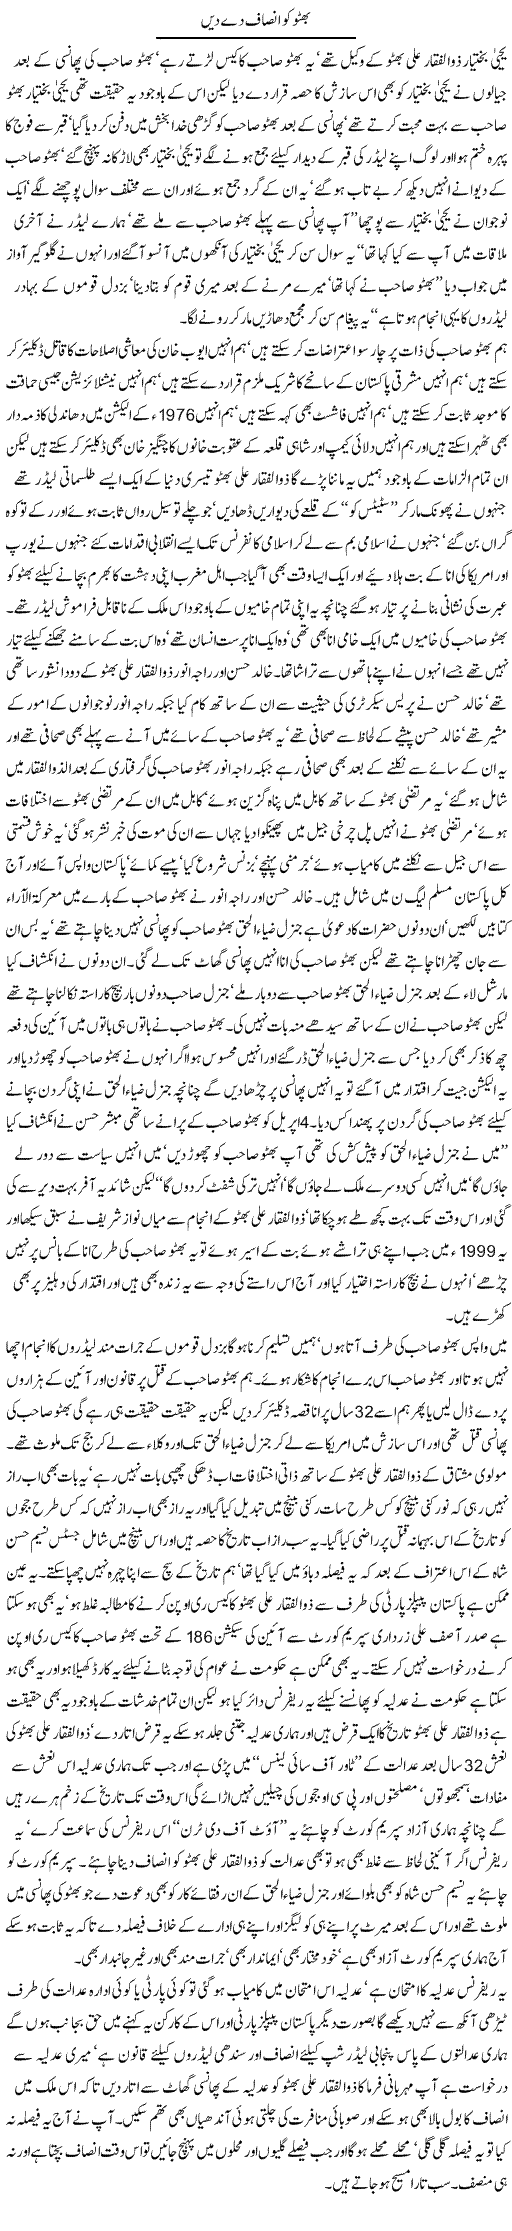 Justice To Bhutto Express Column Javed Chaudhry 8 April 2011